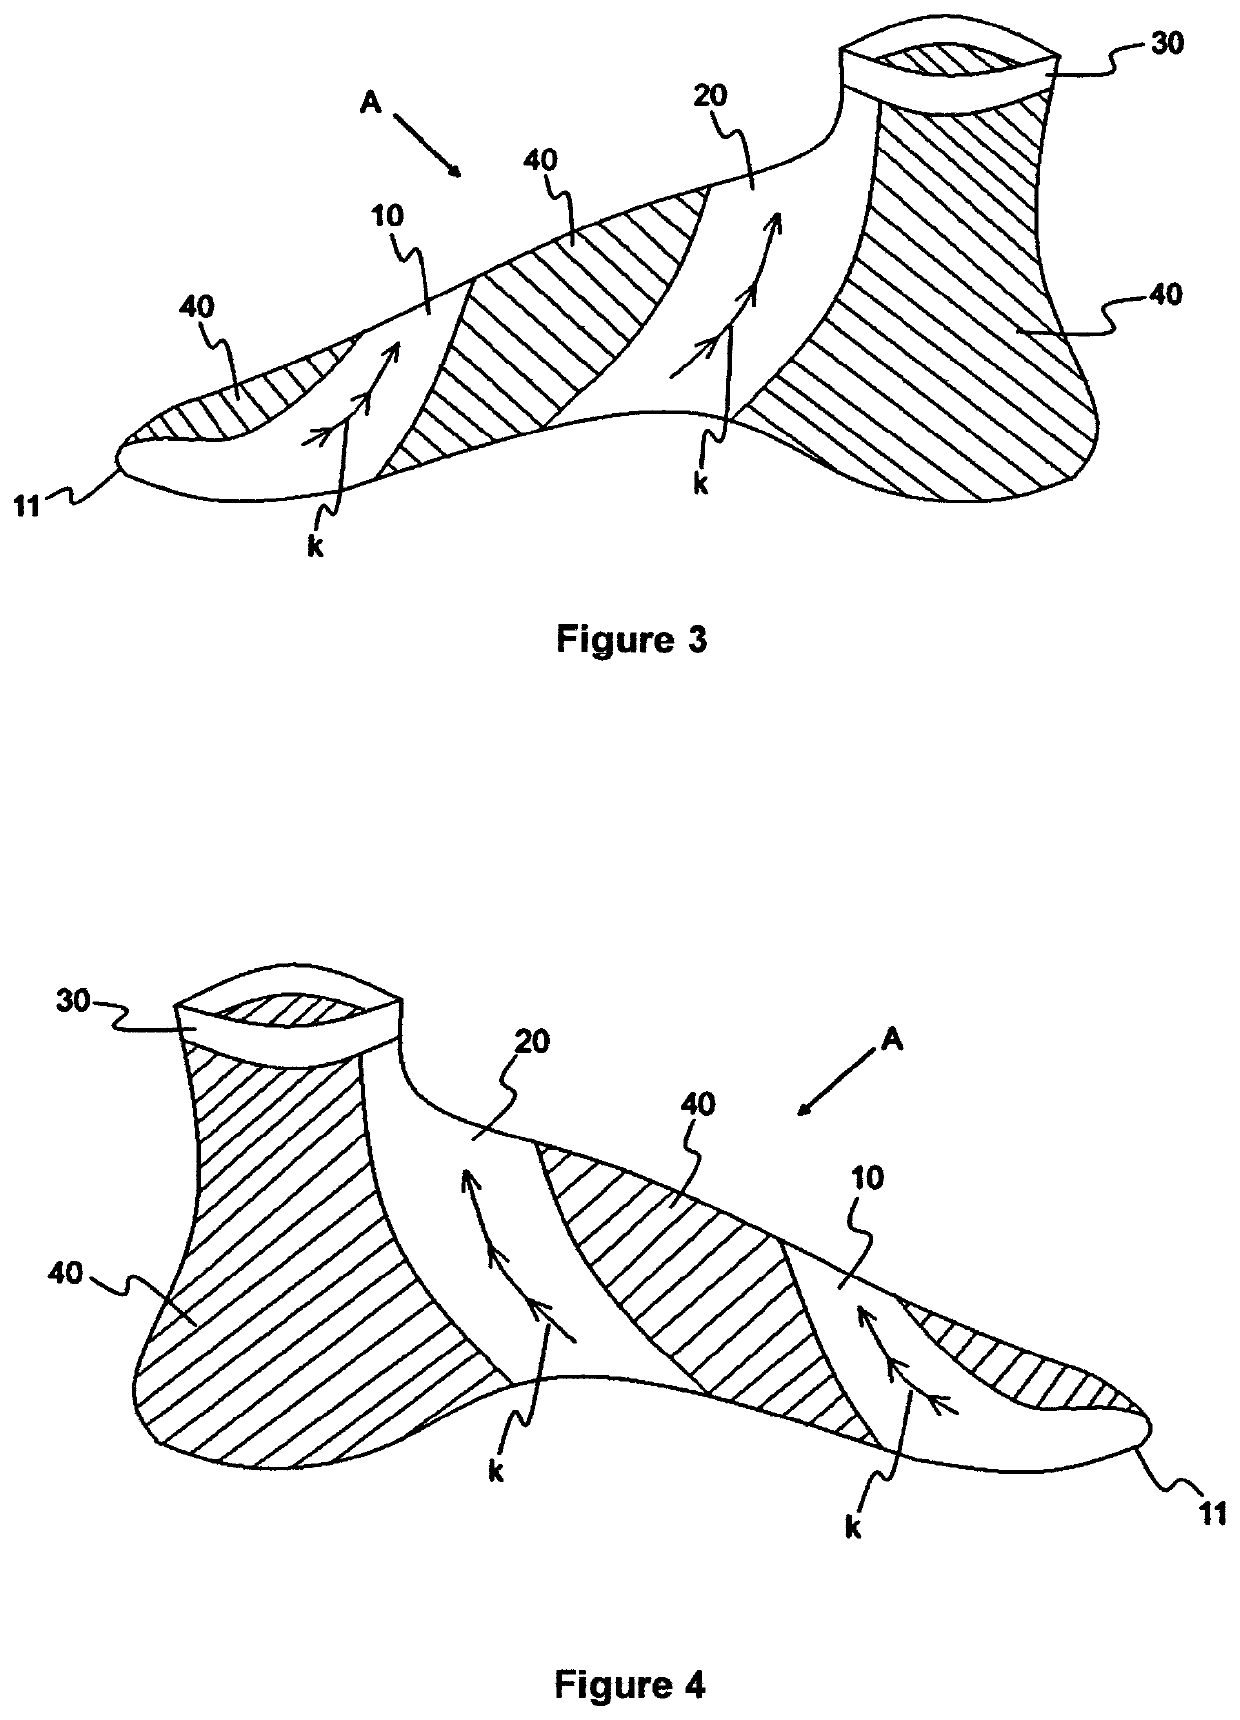 A pair of supportive socks for disorders caused by foot deformities